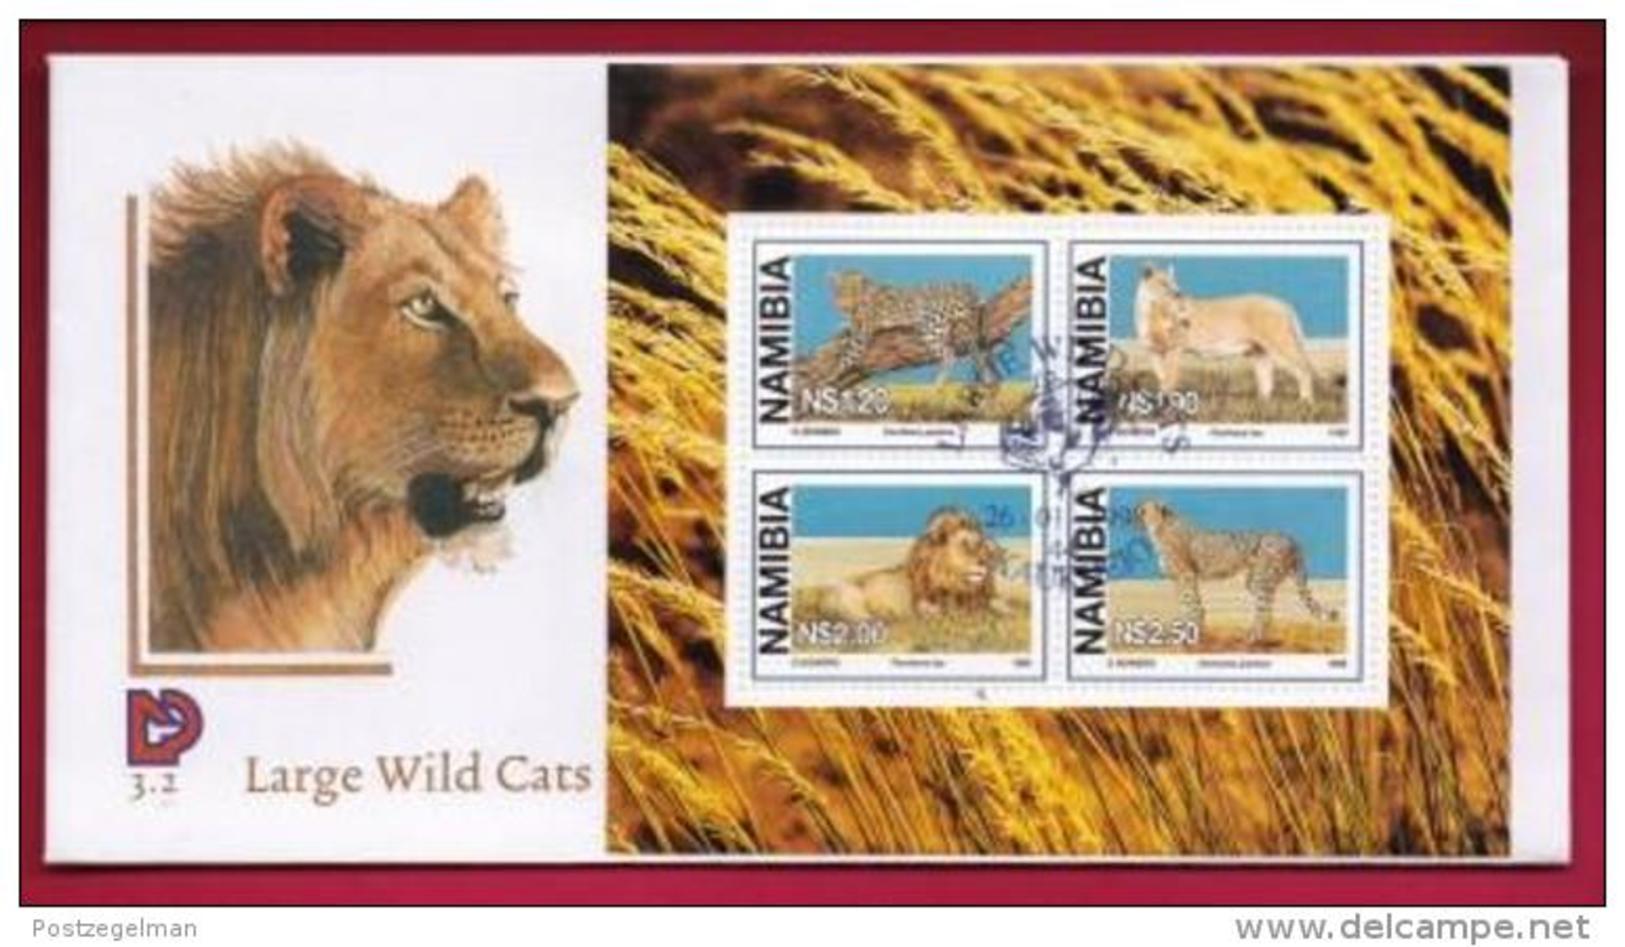 NAMIBIA, 1998, First Day Cover, Large Wild Cats, Min Sheet,Michel 3-02, F3904 - Namibië (1990- ...)